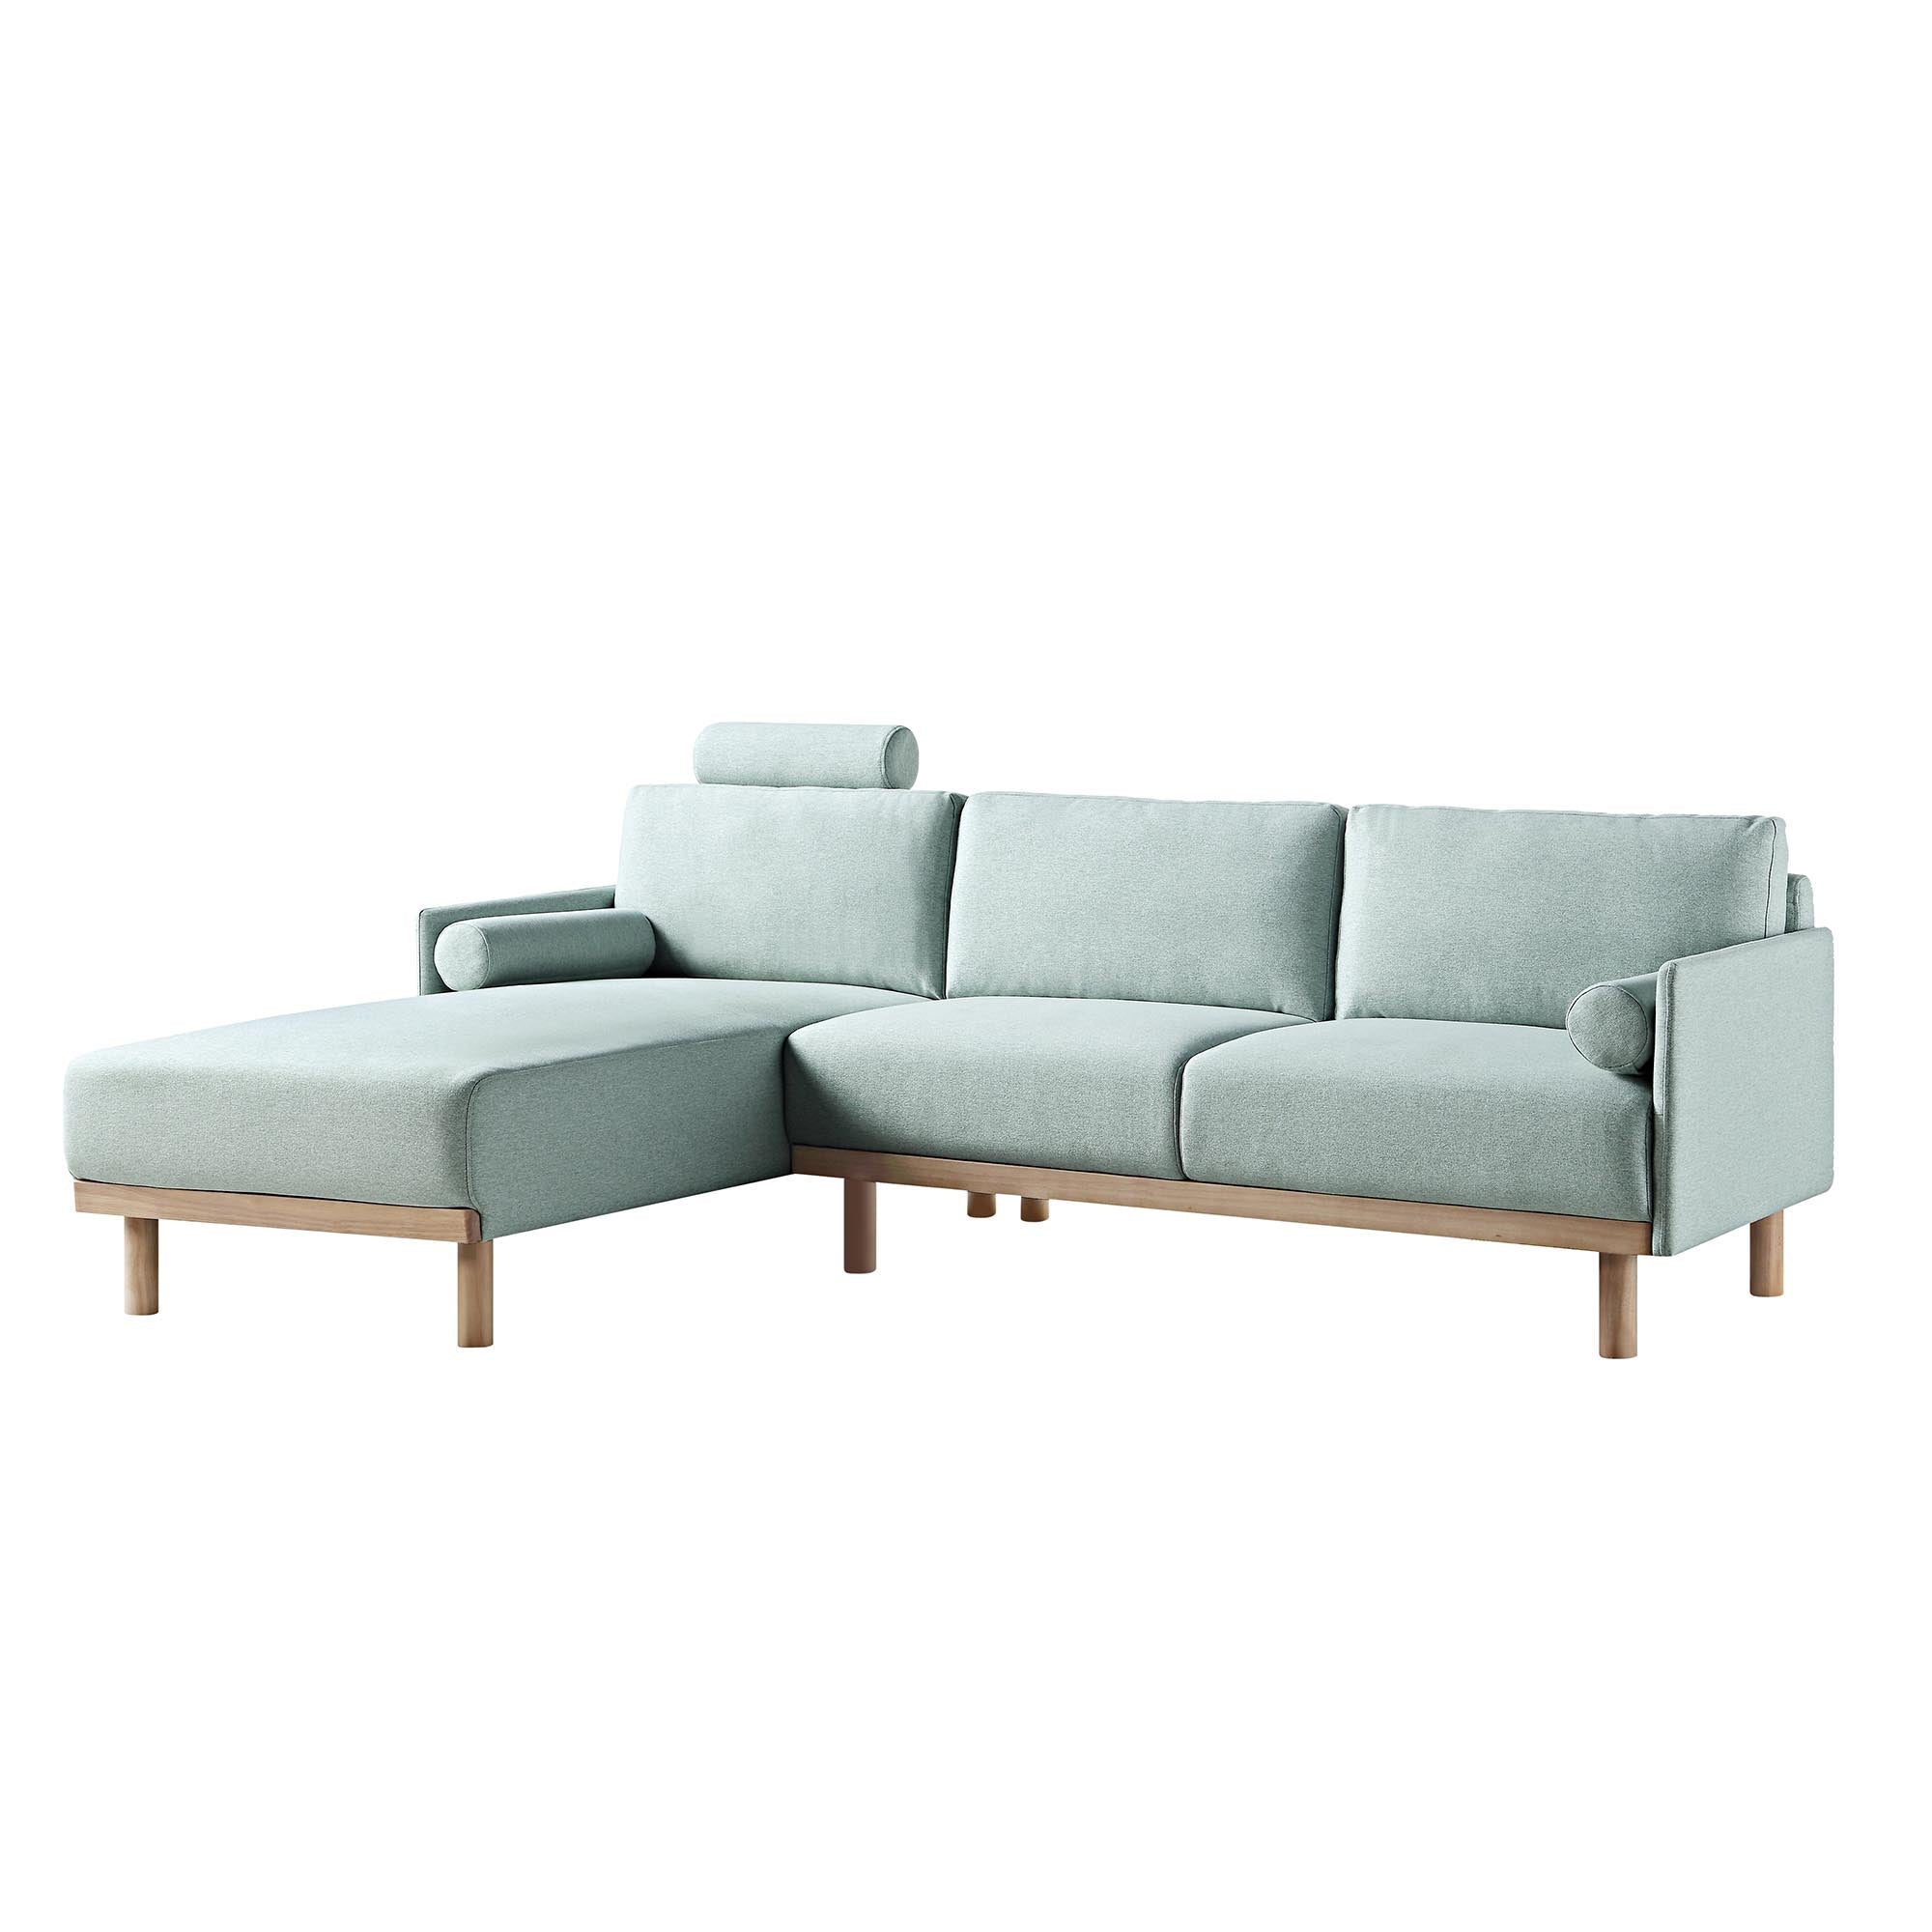 Timber Sage Green Fabric Sofa, Large 3-Seater Chaise Sofa Left Hand